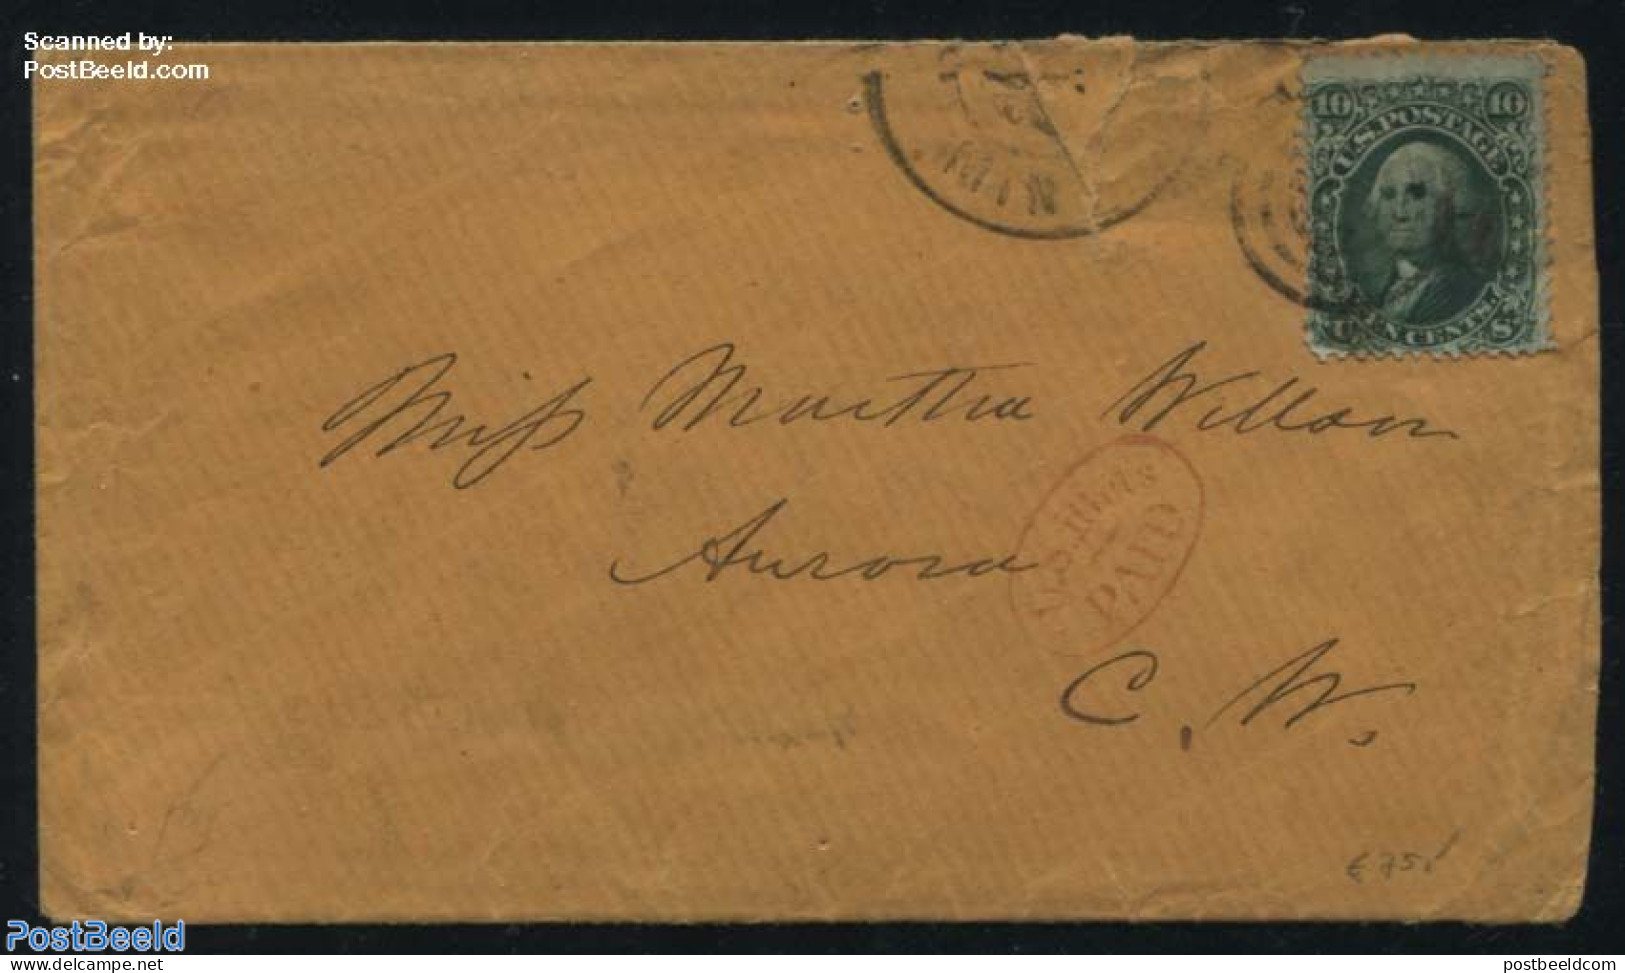 United States Of America 1864 Letter To Aurora With 10c Green, Postal History - Lettres & Documents